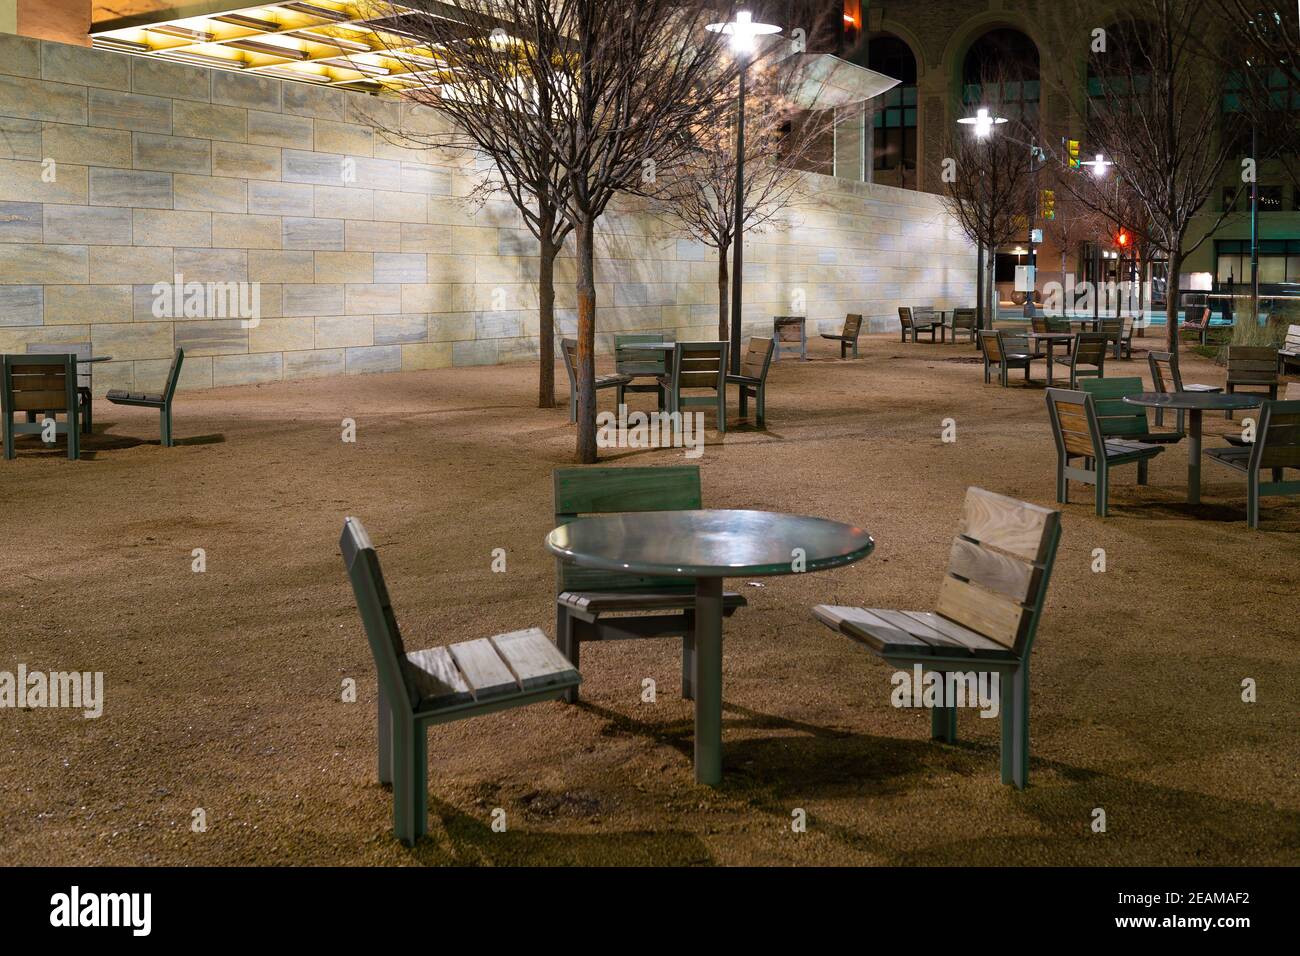 Outdoor seating area at night in Dallas, Texas Stock Photo